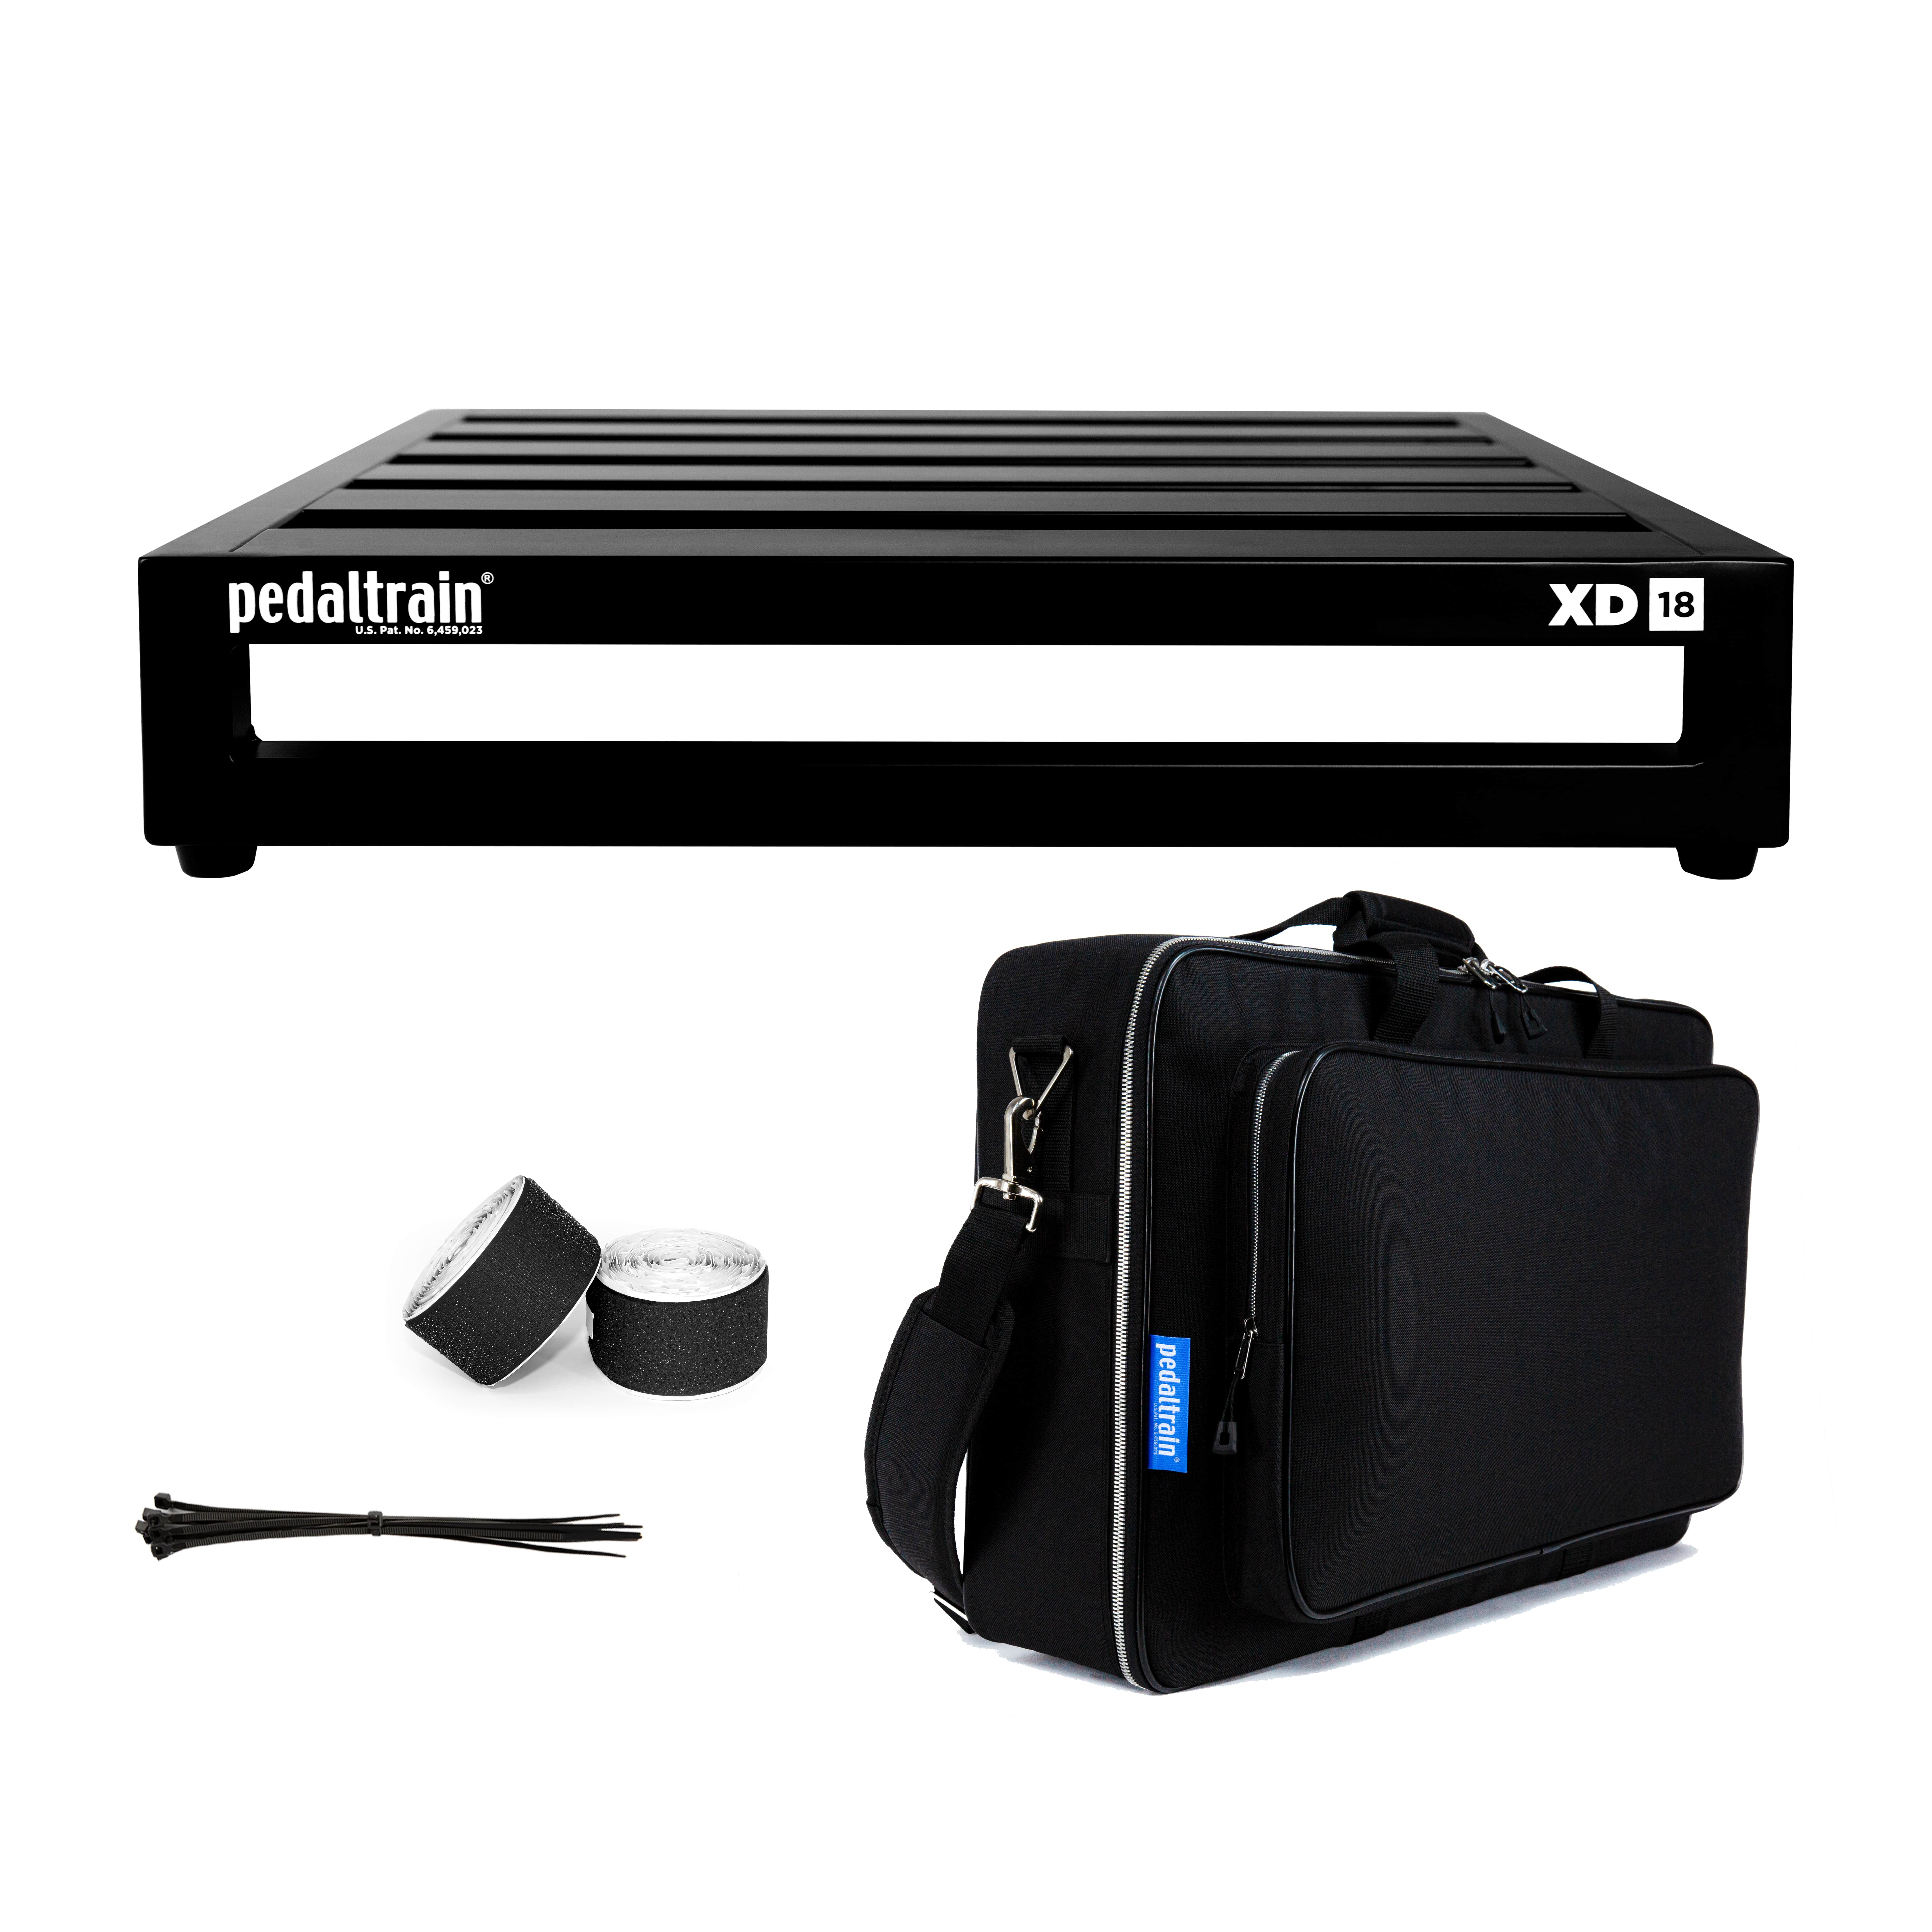 Pedaltrain XD-18 with Deluxe Soft Case - GigGear